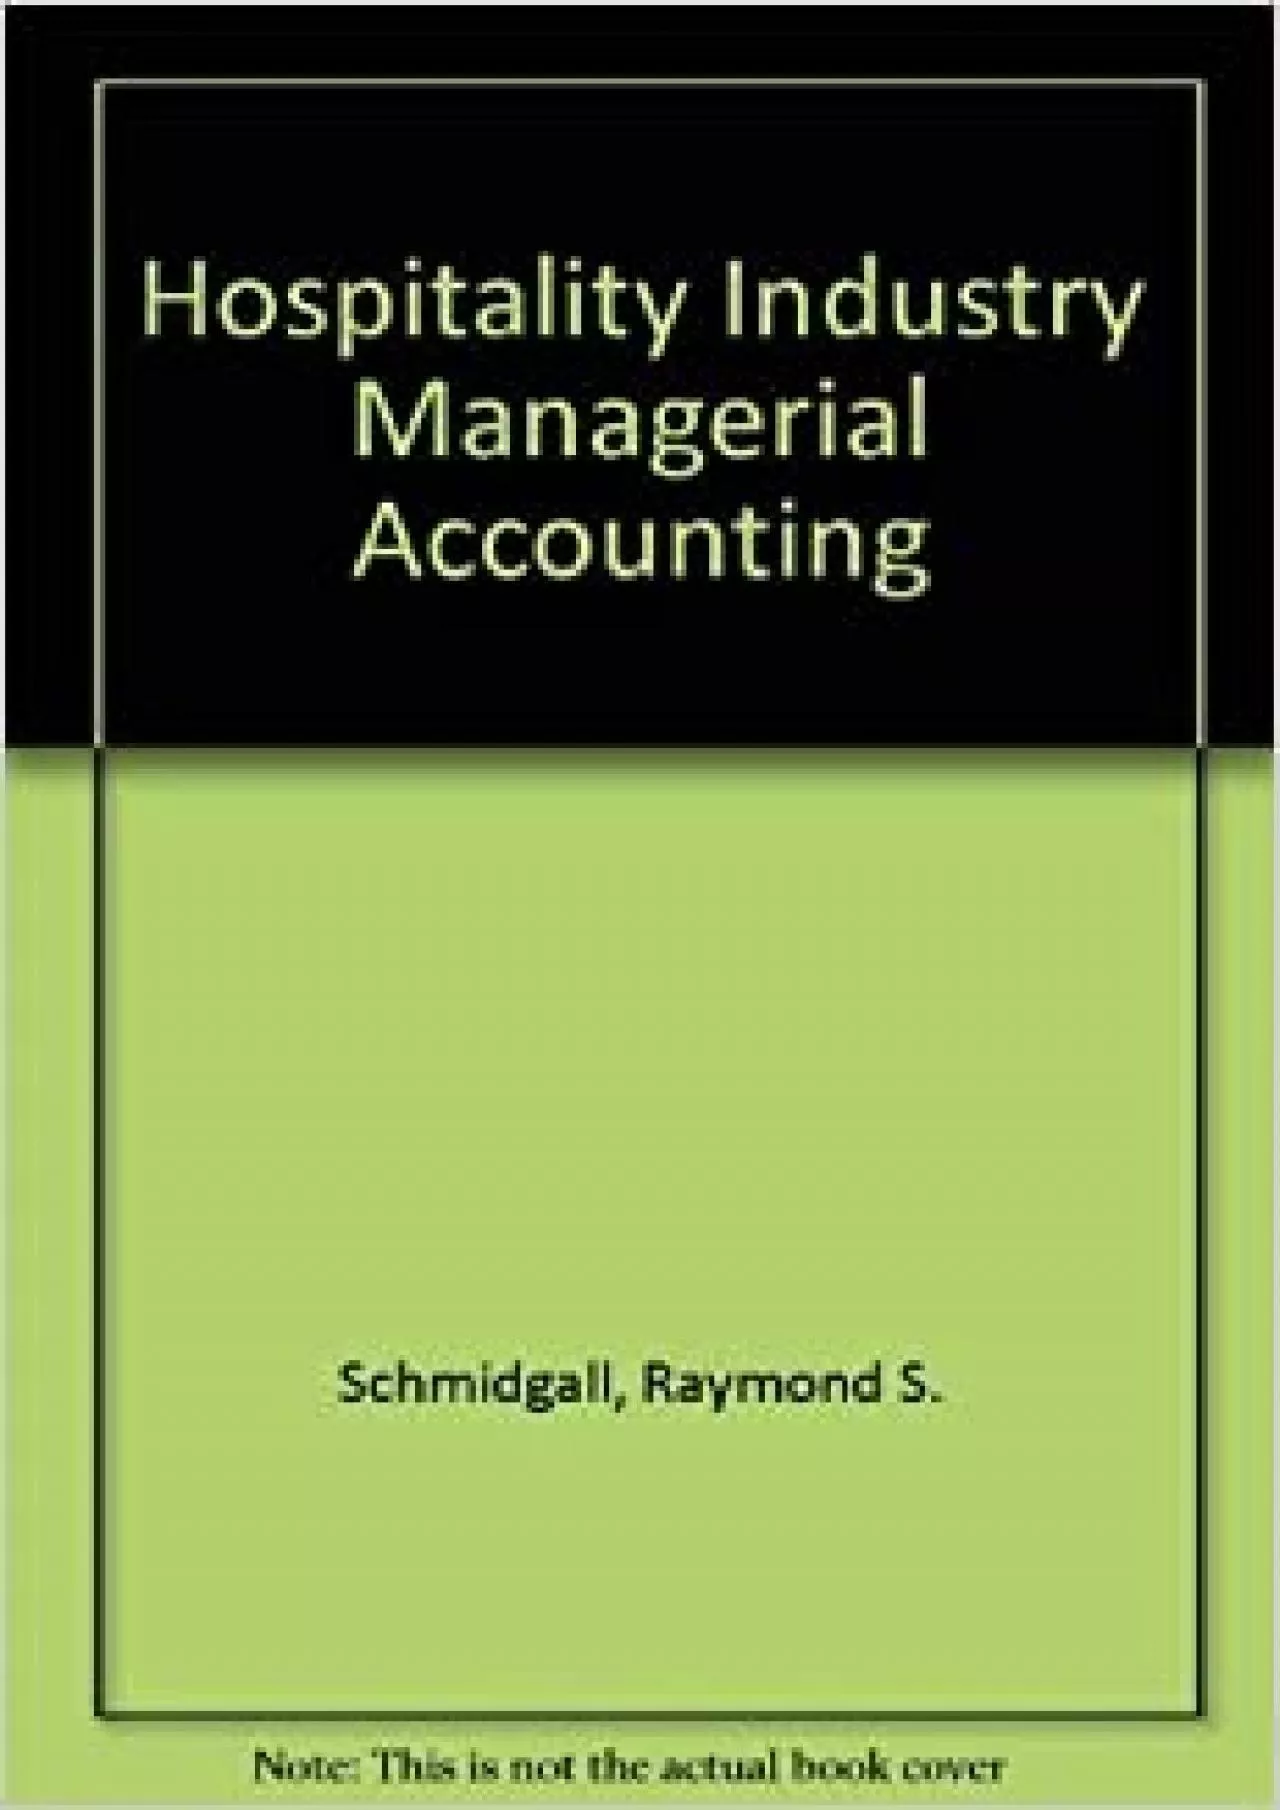 Hospitality industry managerial accounting